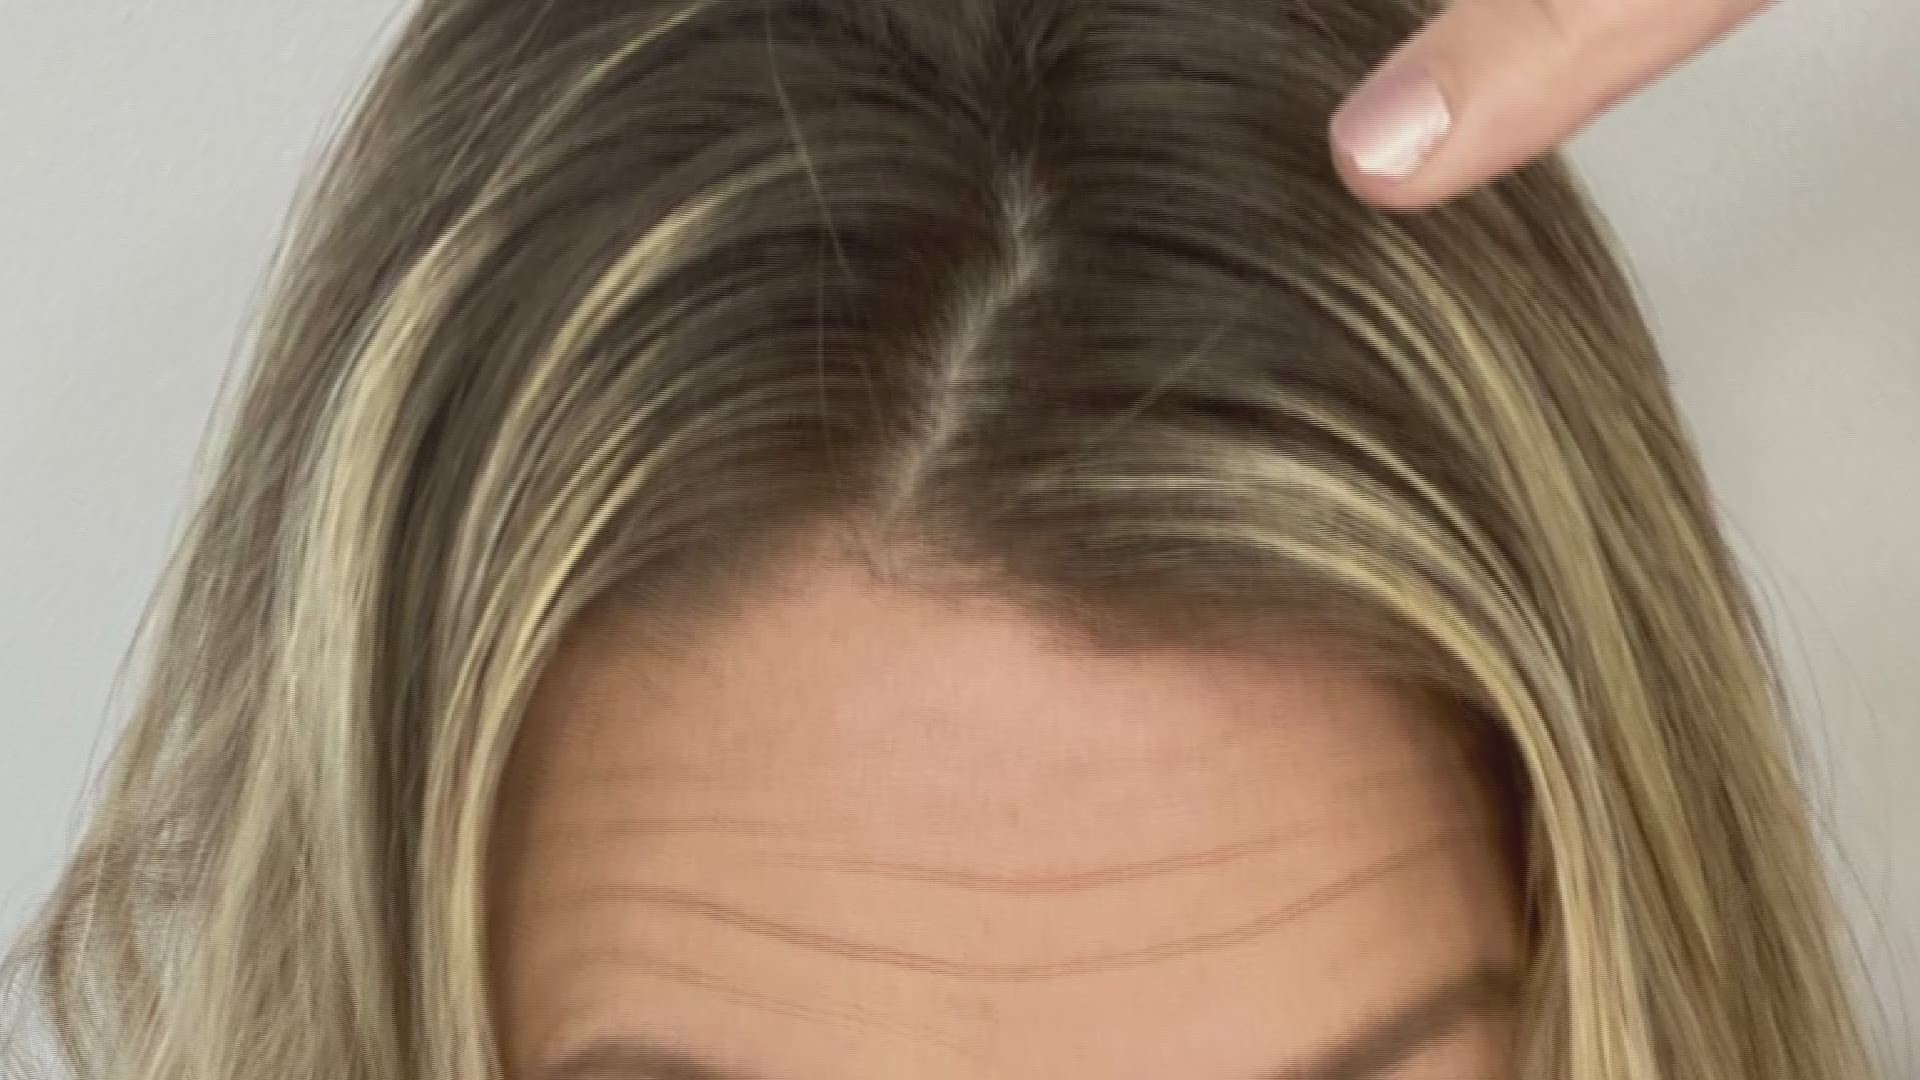 10. "Dirty Blond Copper Hair Maintenance: How Often Should You Touch Up Your Roots?" - wide 5